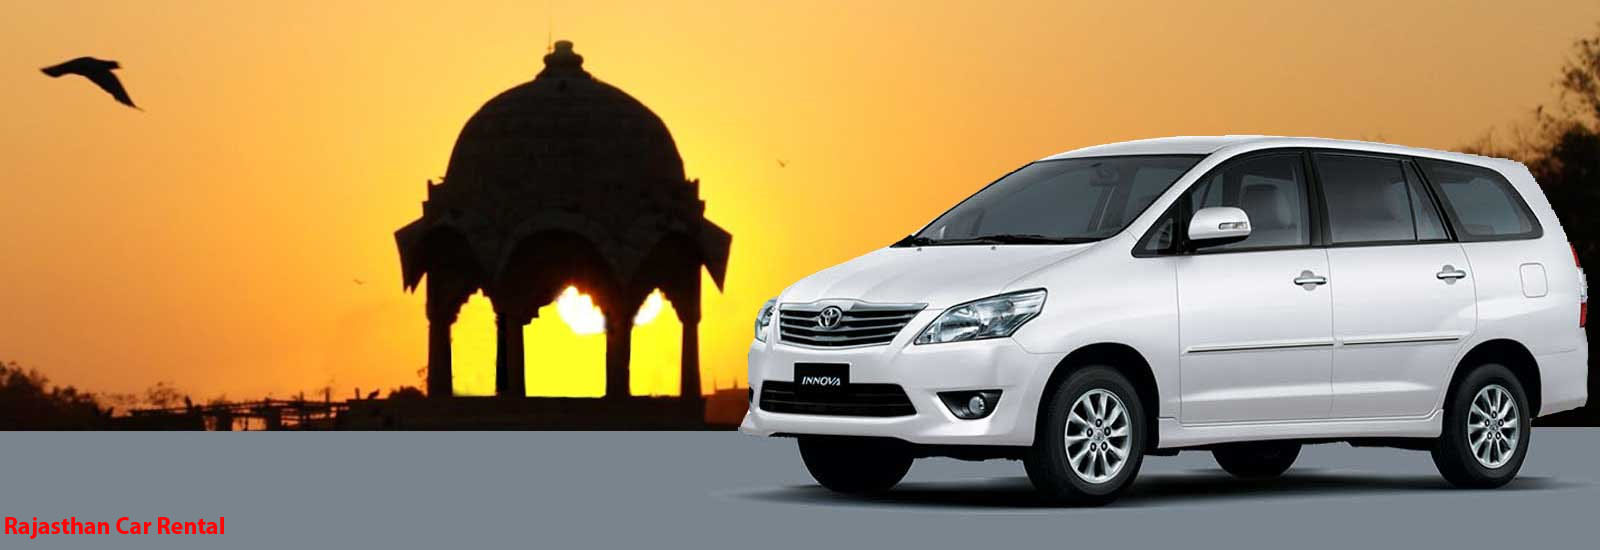 Plan Your Road Trip With Rajasthan Car Rental Services